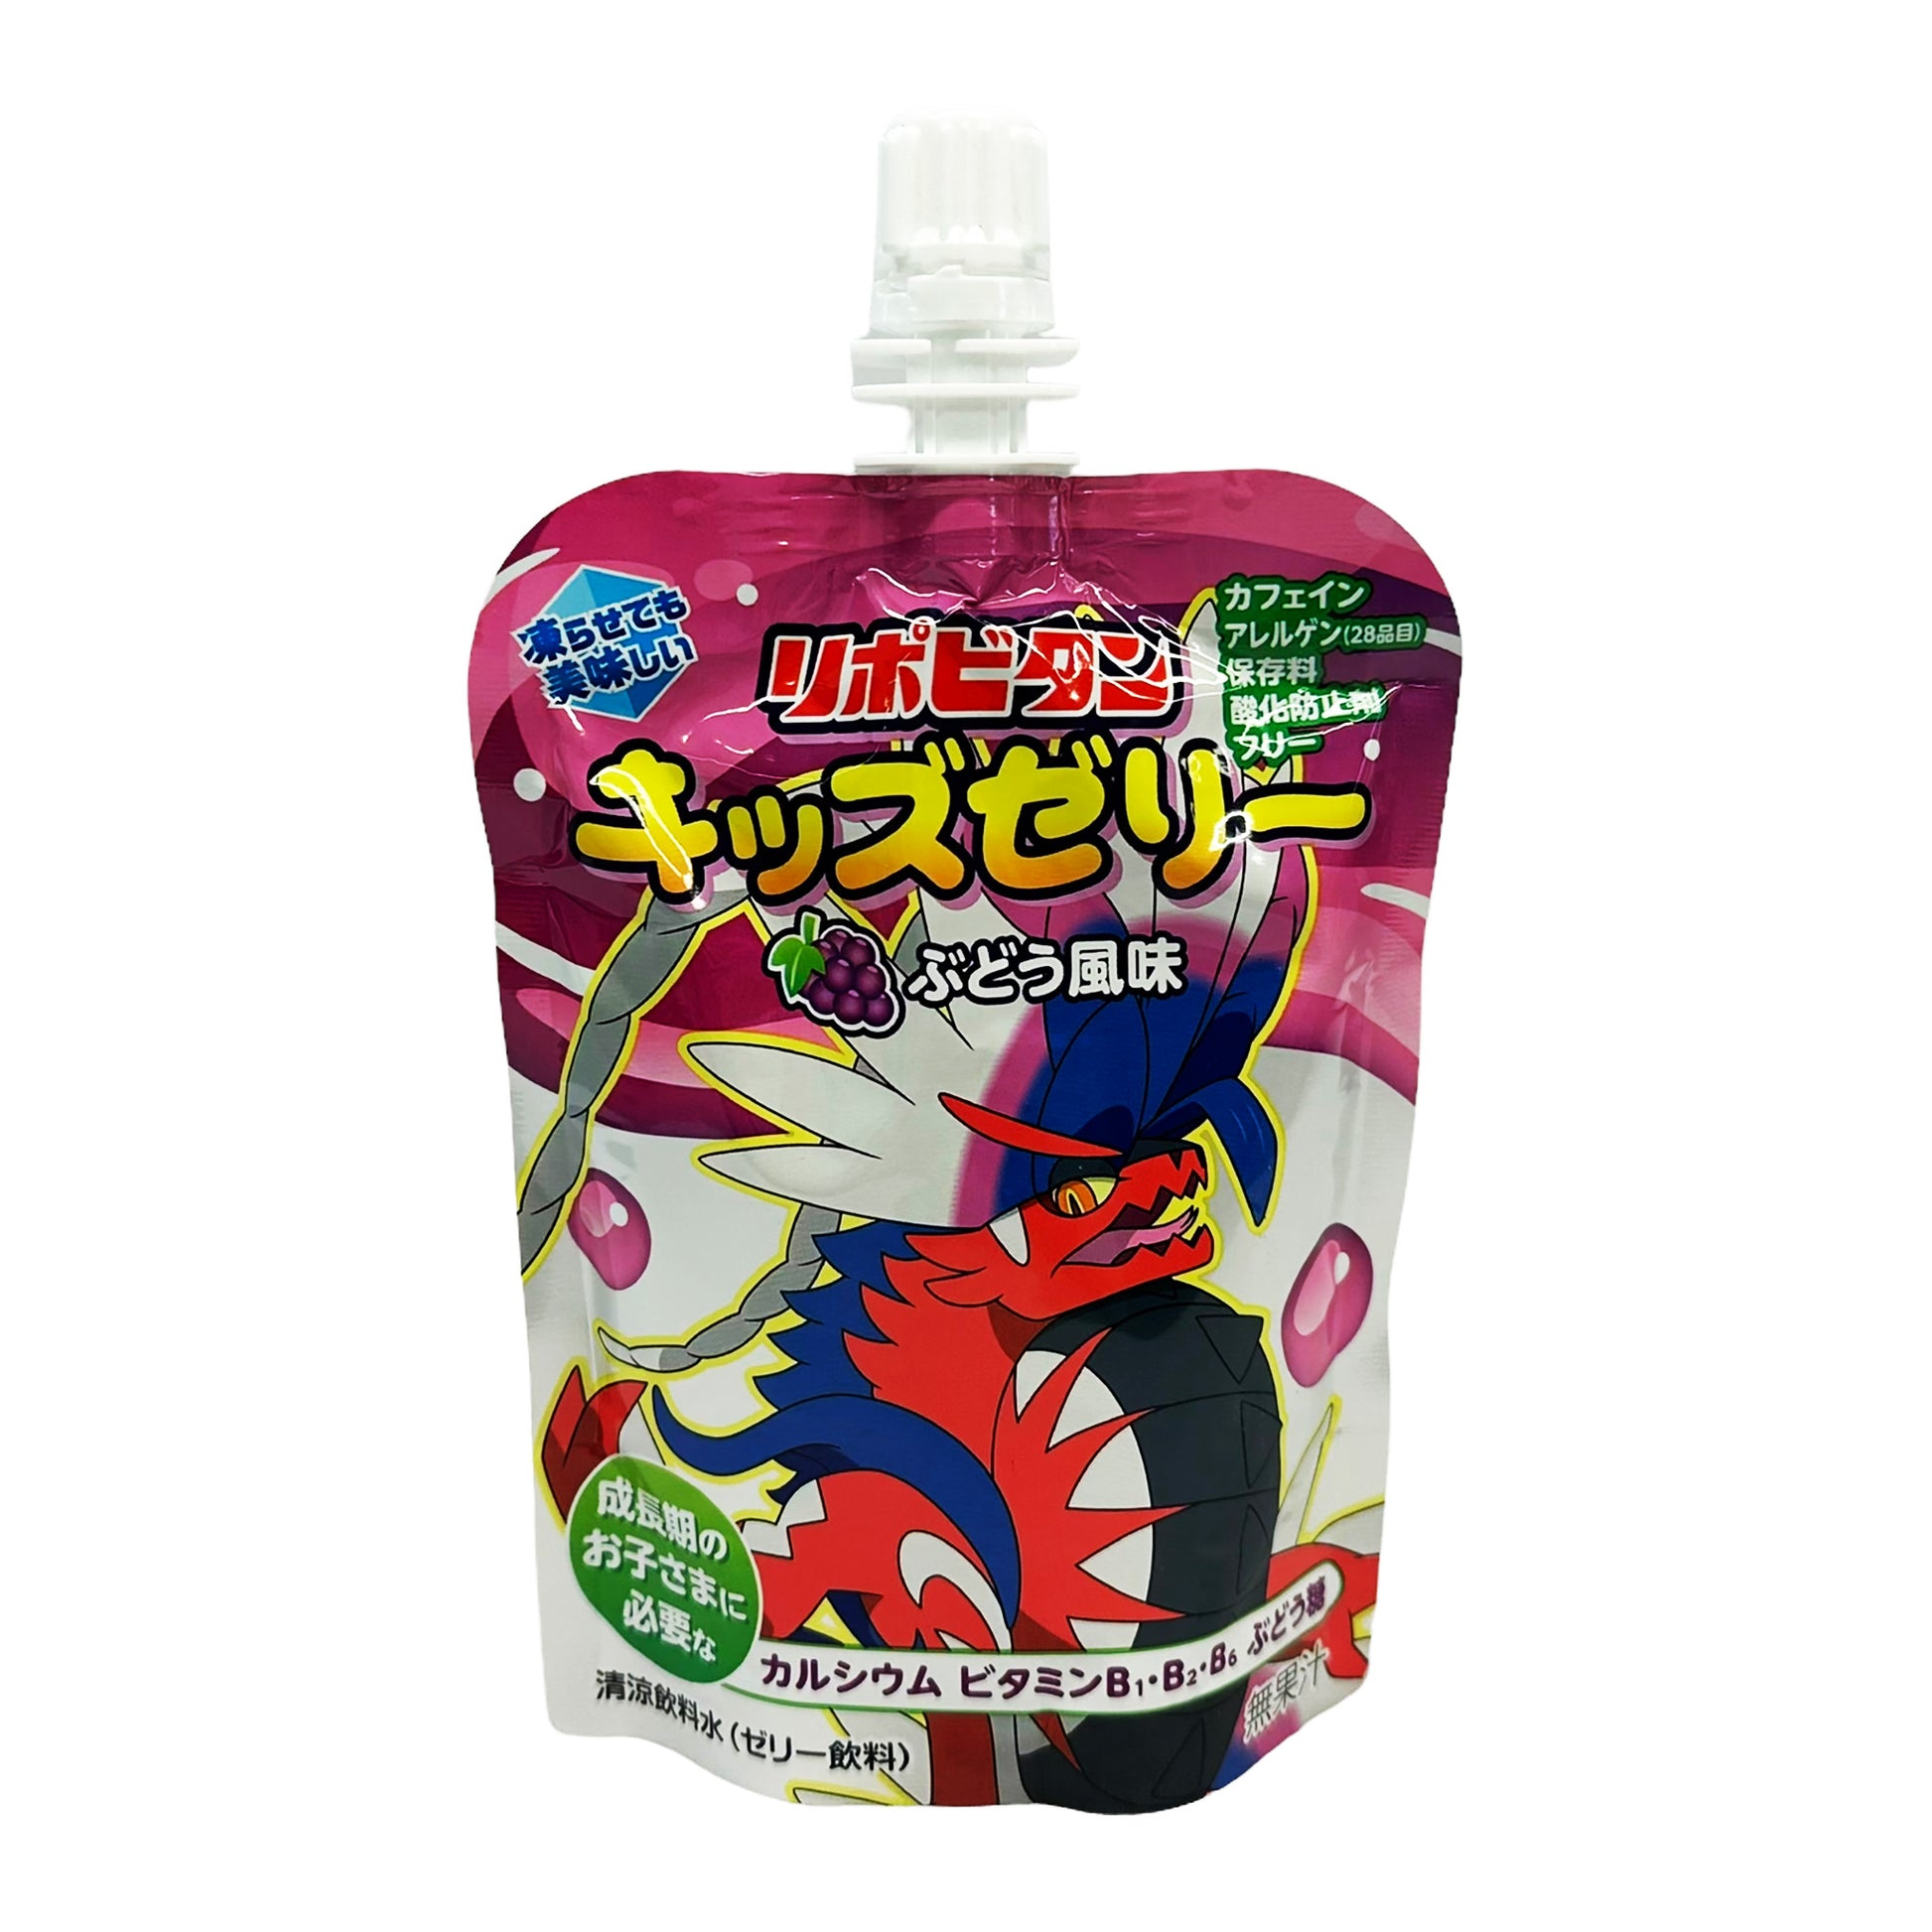 Front graphic image 4 of Taisho Pokemon Jelly Drink - Grape 4.4oz (125g)